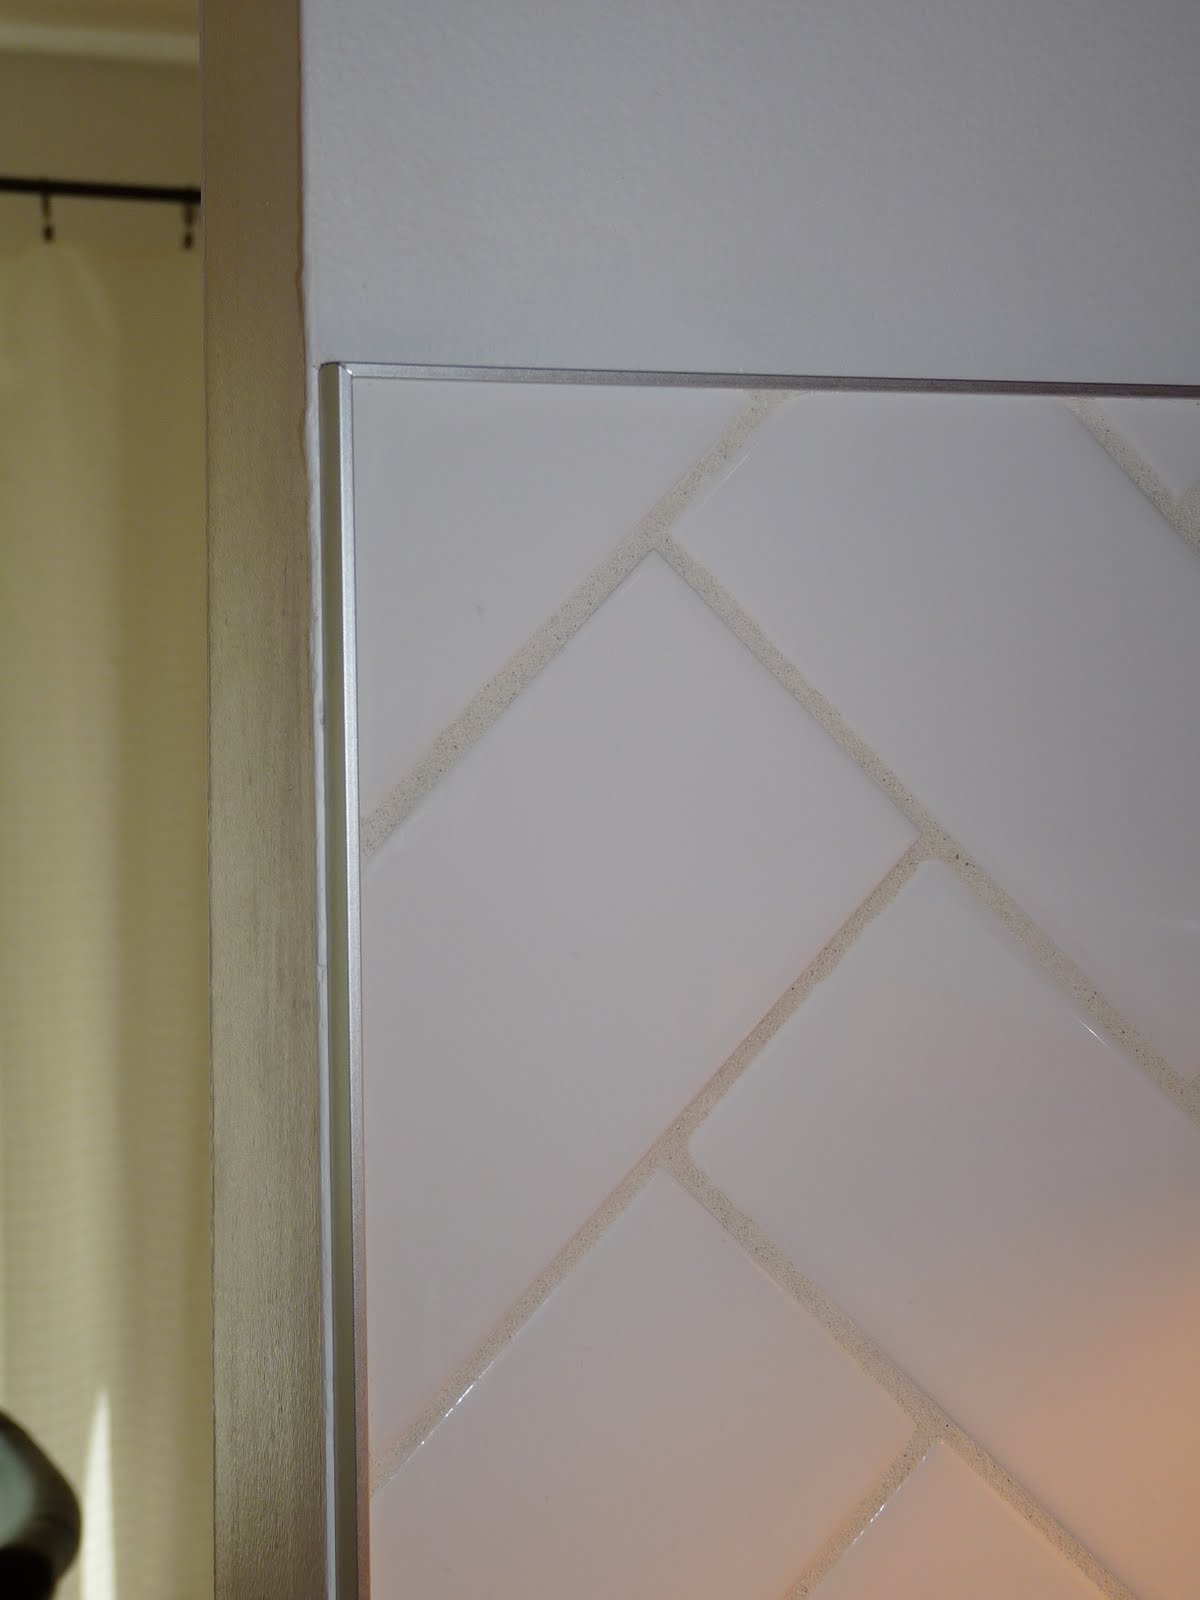 How to Finish Tile With Edging Dans le